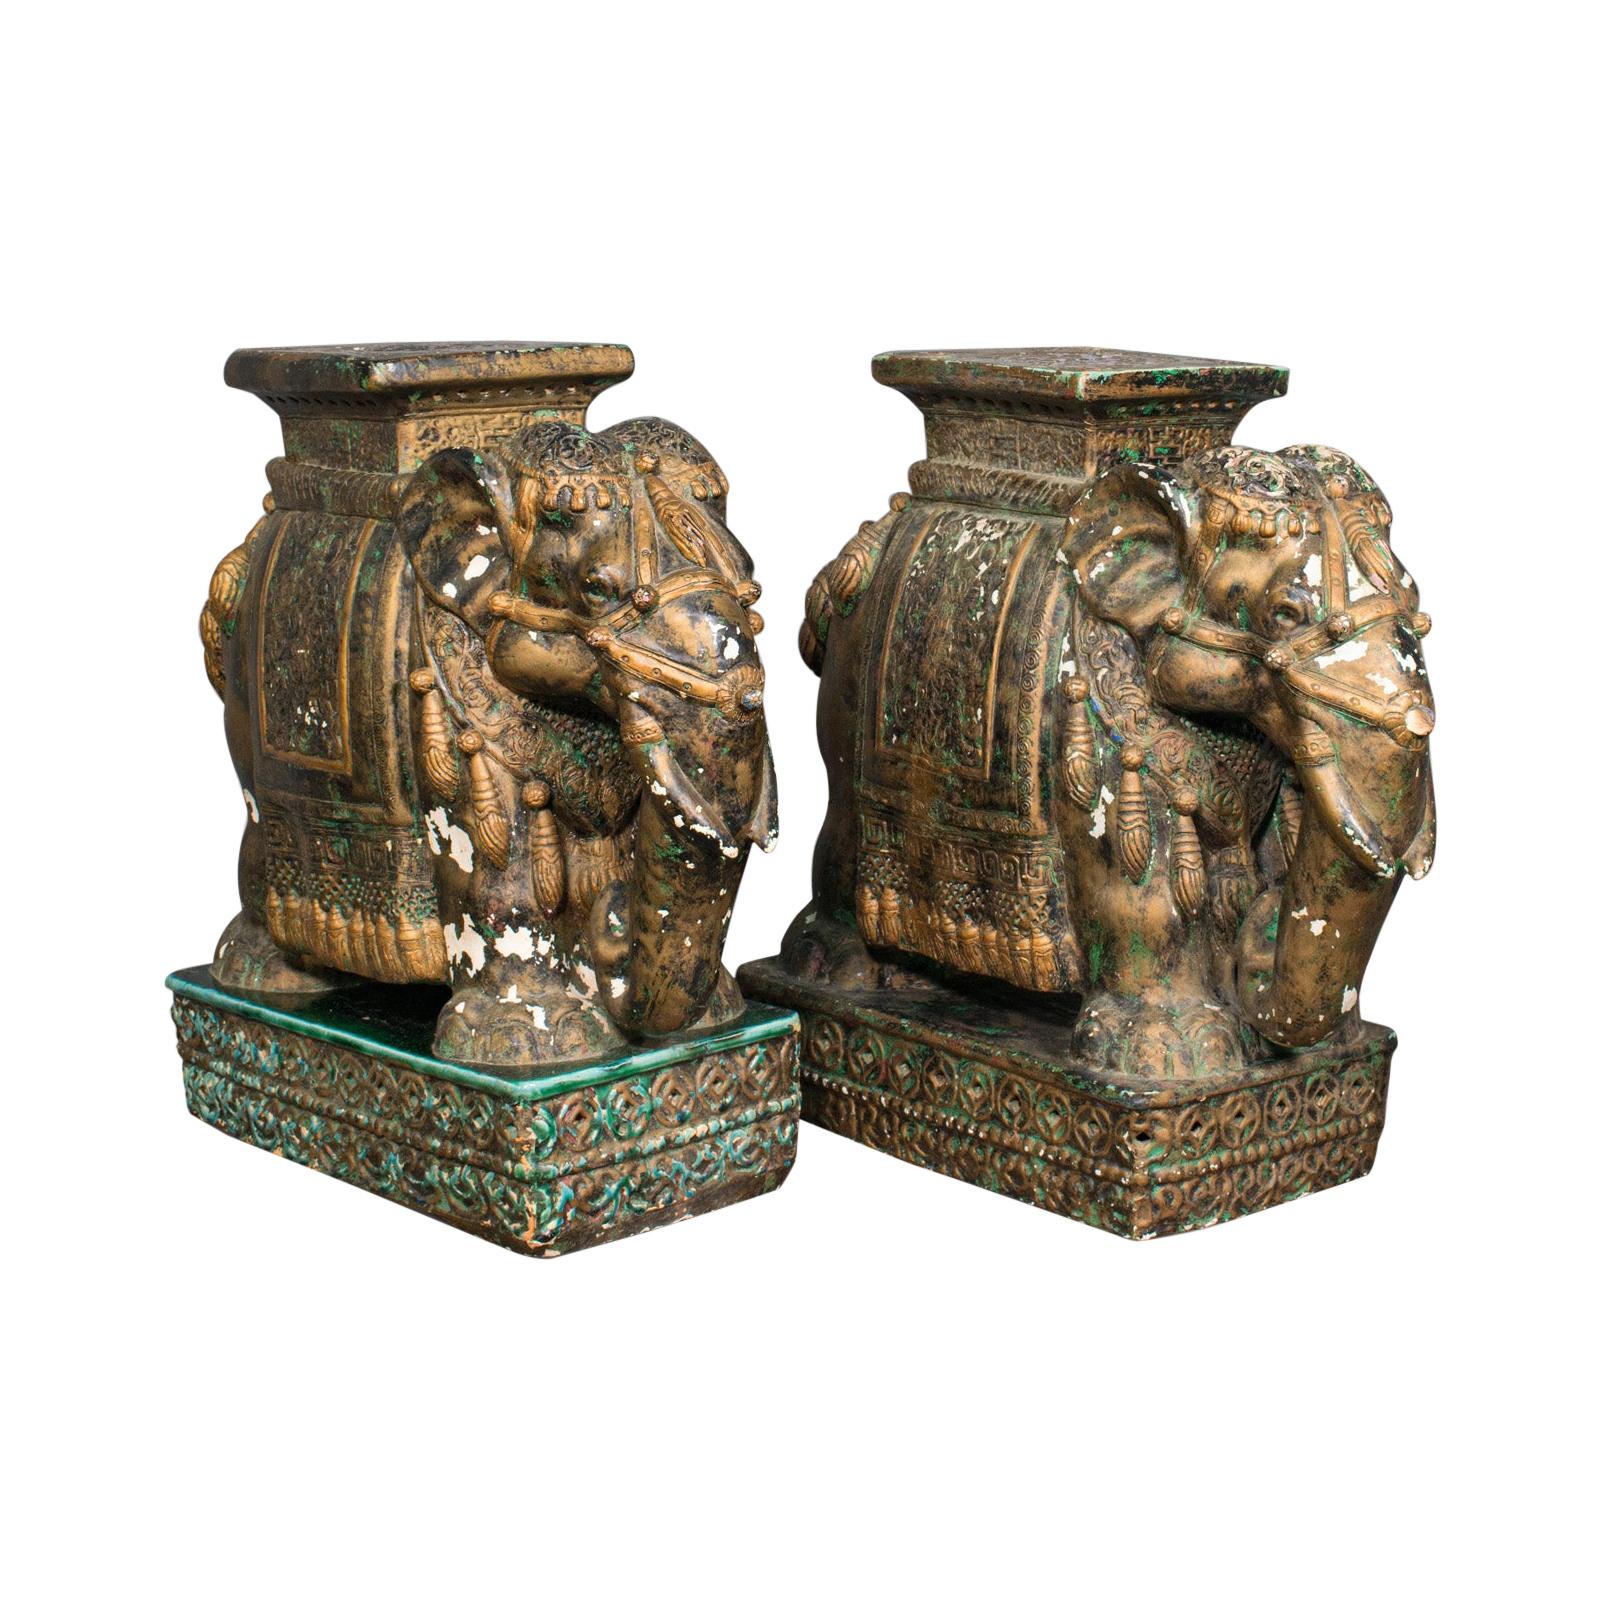 Pair of Antique Decorative Elephant Side Table, Indian, Ceramic, Occasional